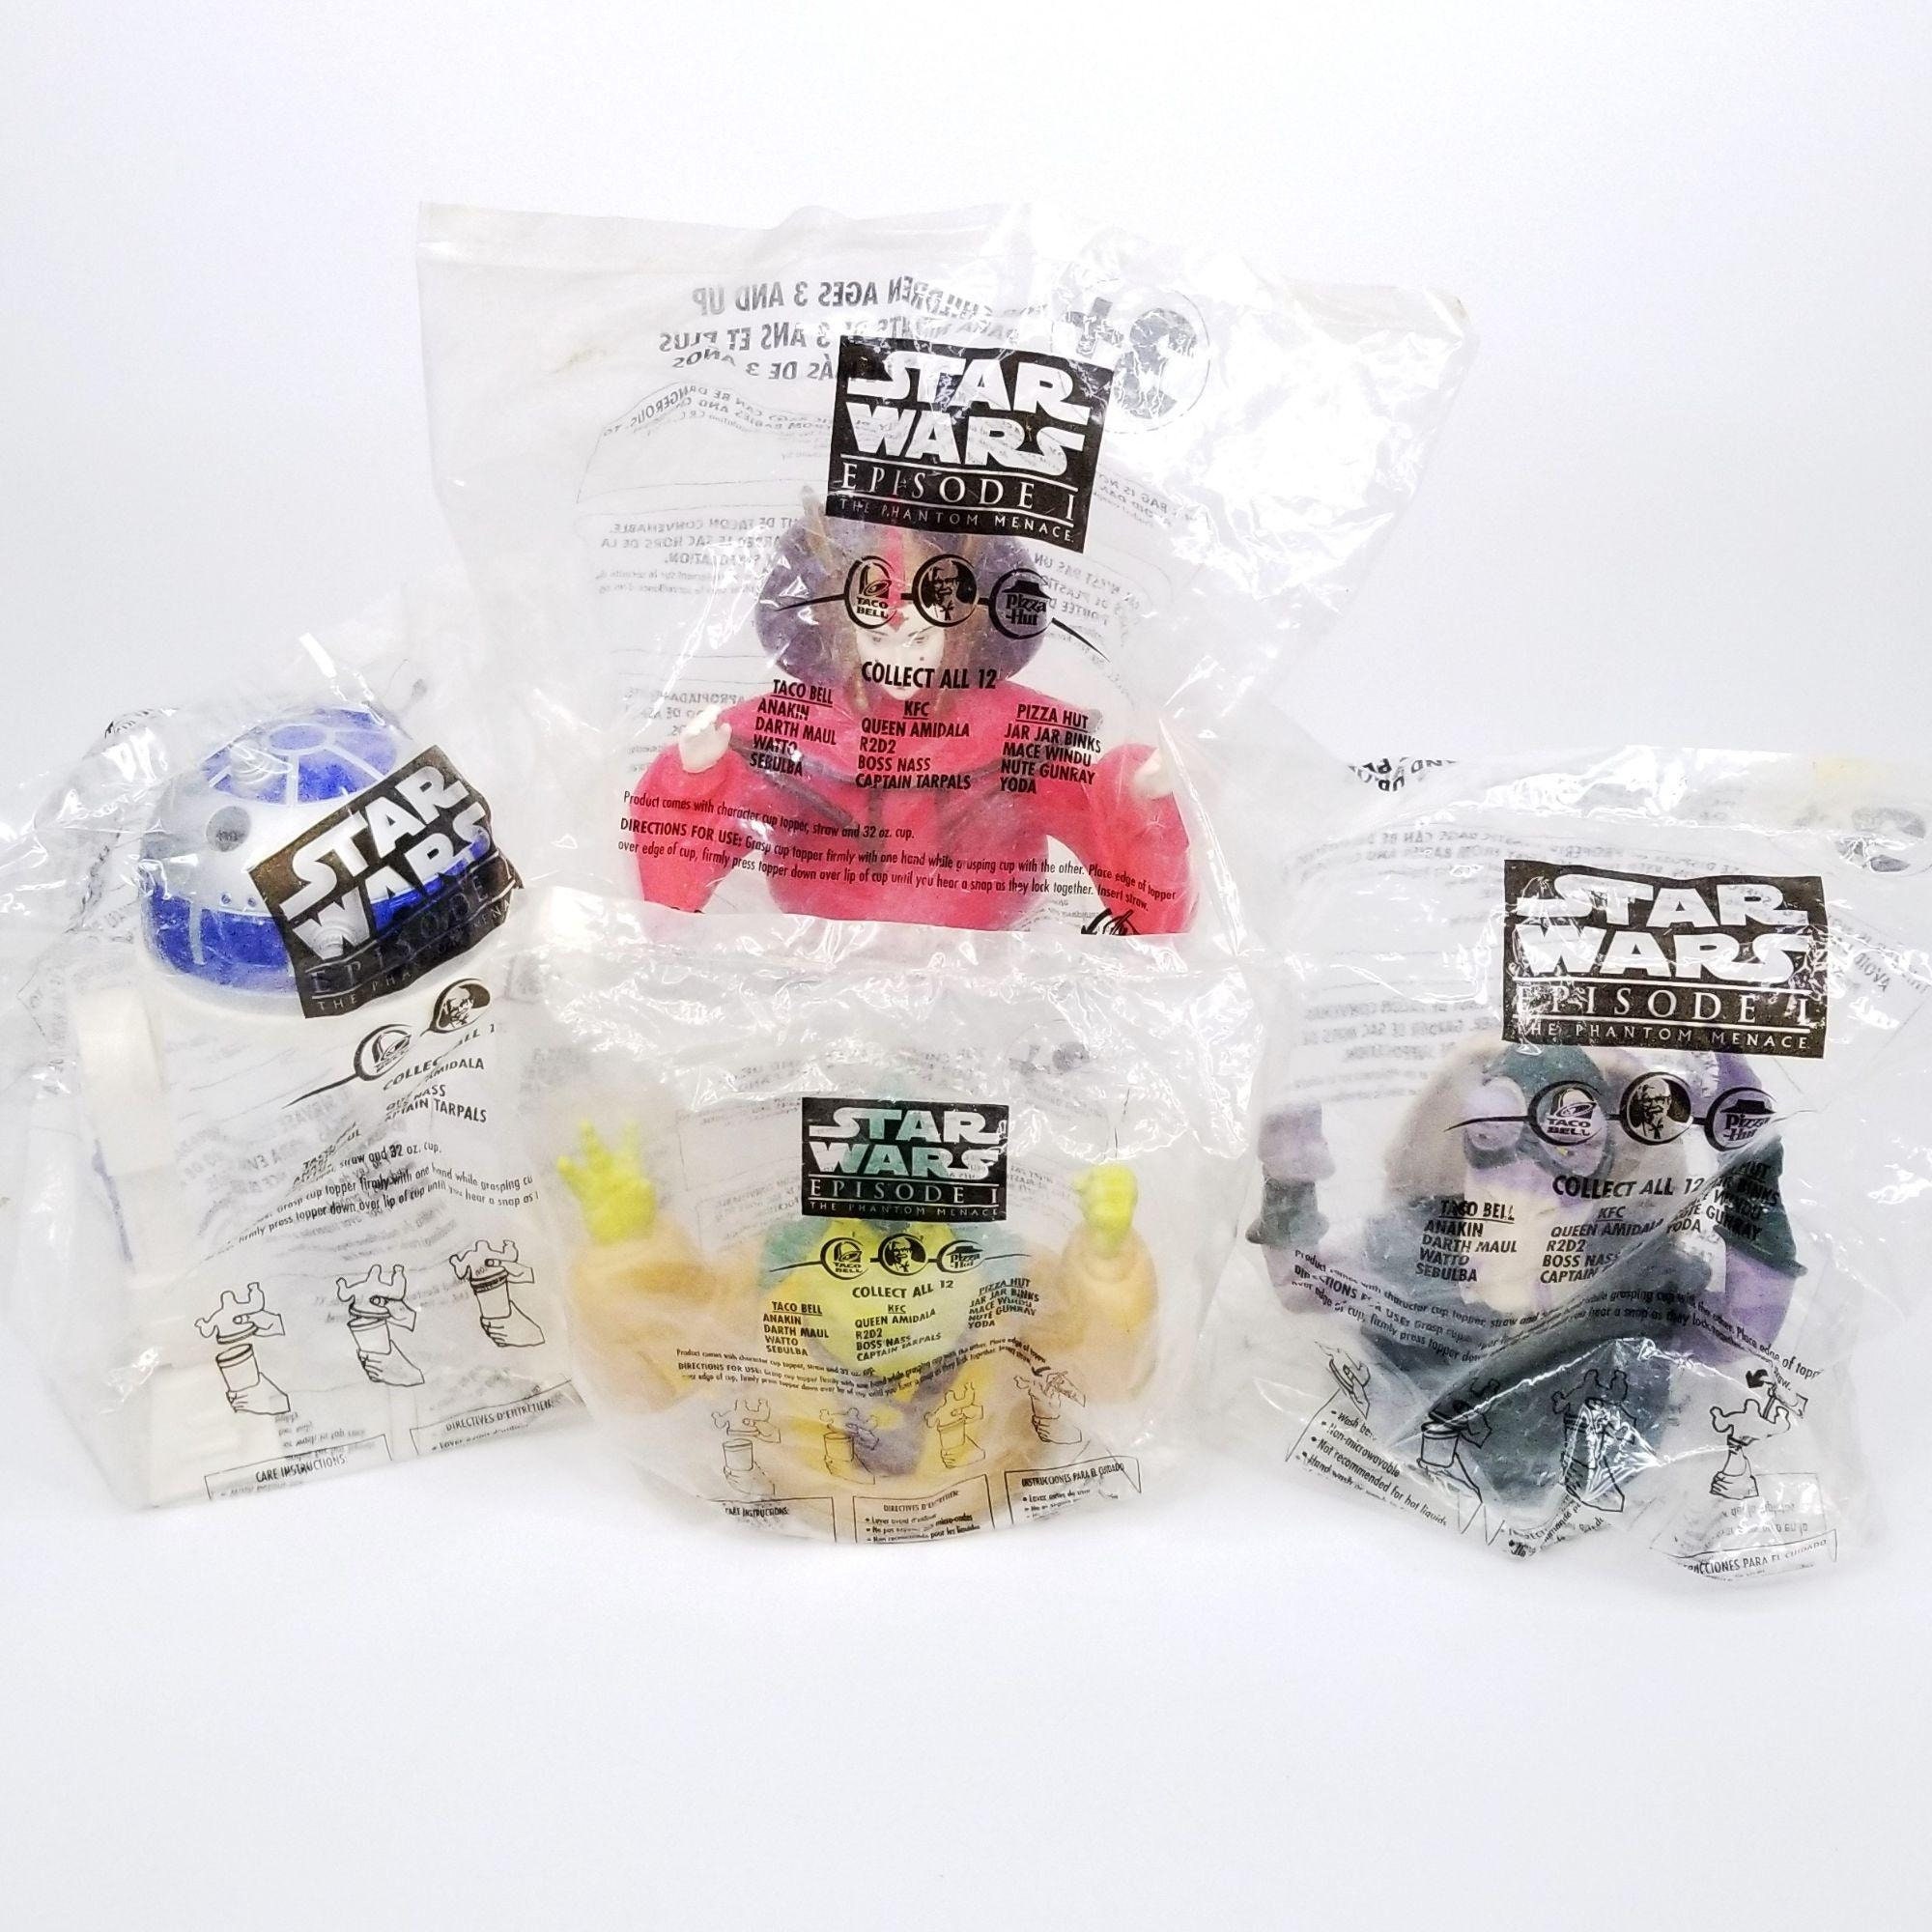 Star Wars Episode 1 Set of 5 Cups And Toppers Taco Bell KFC Pizza Hut Pepsi  1999